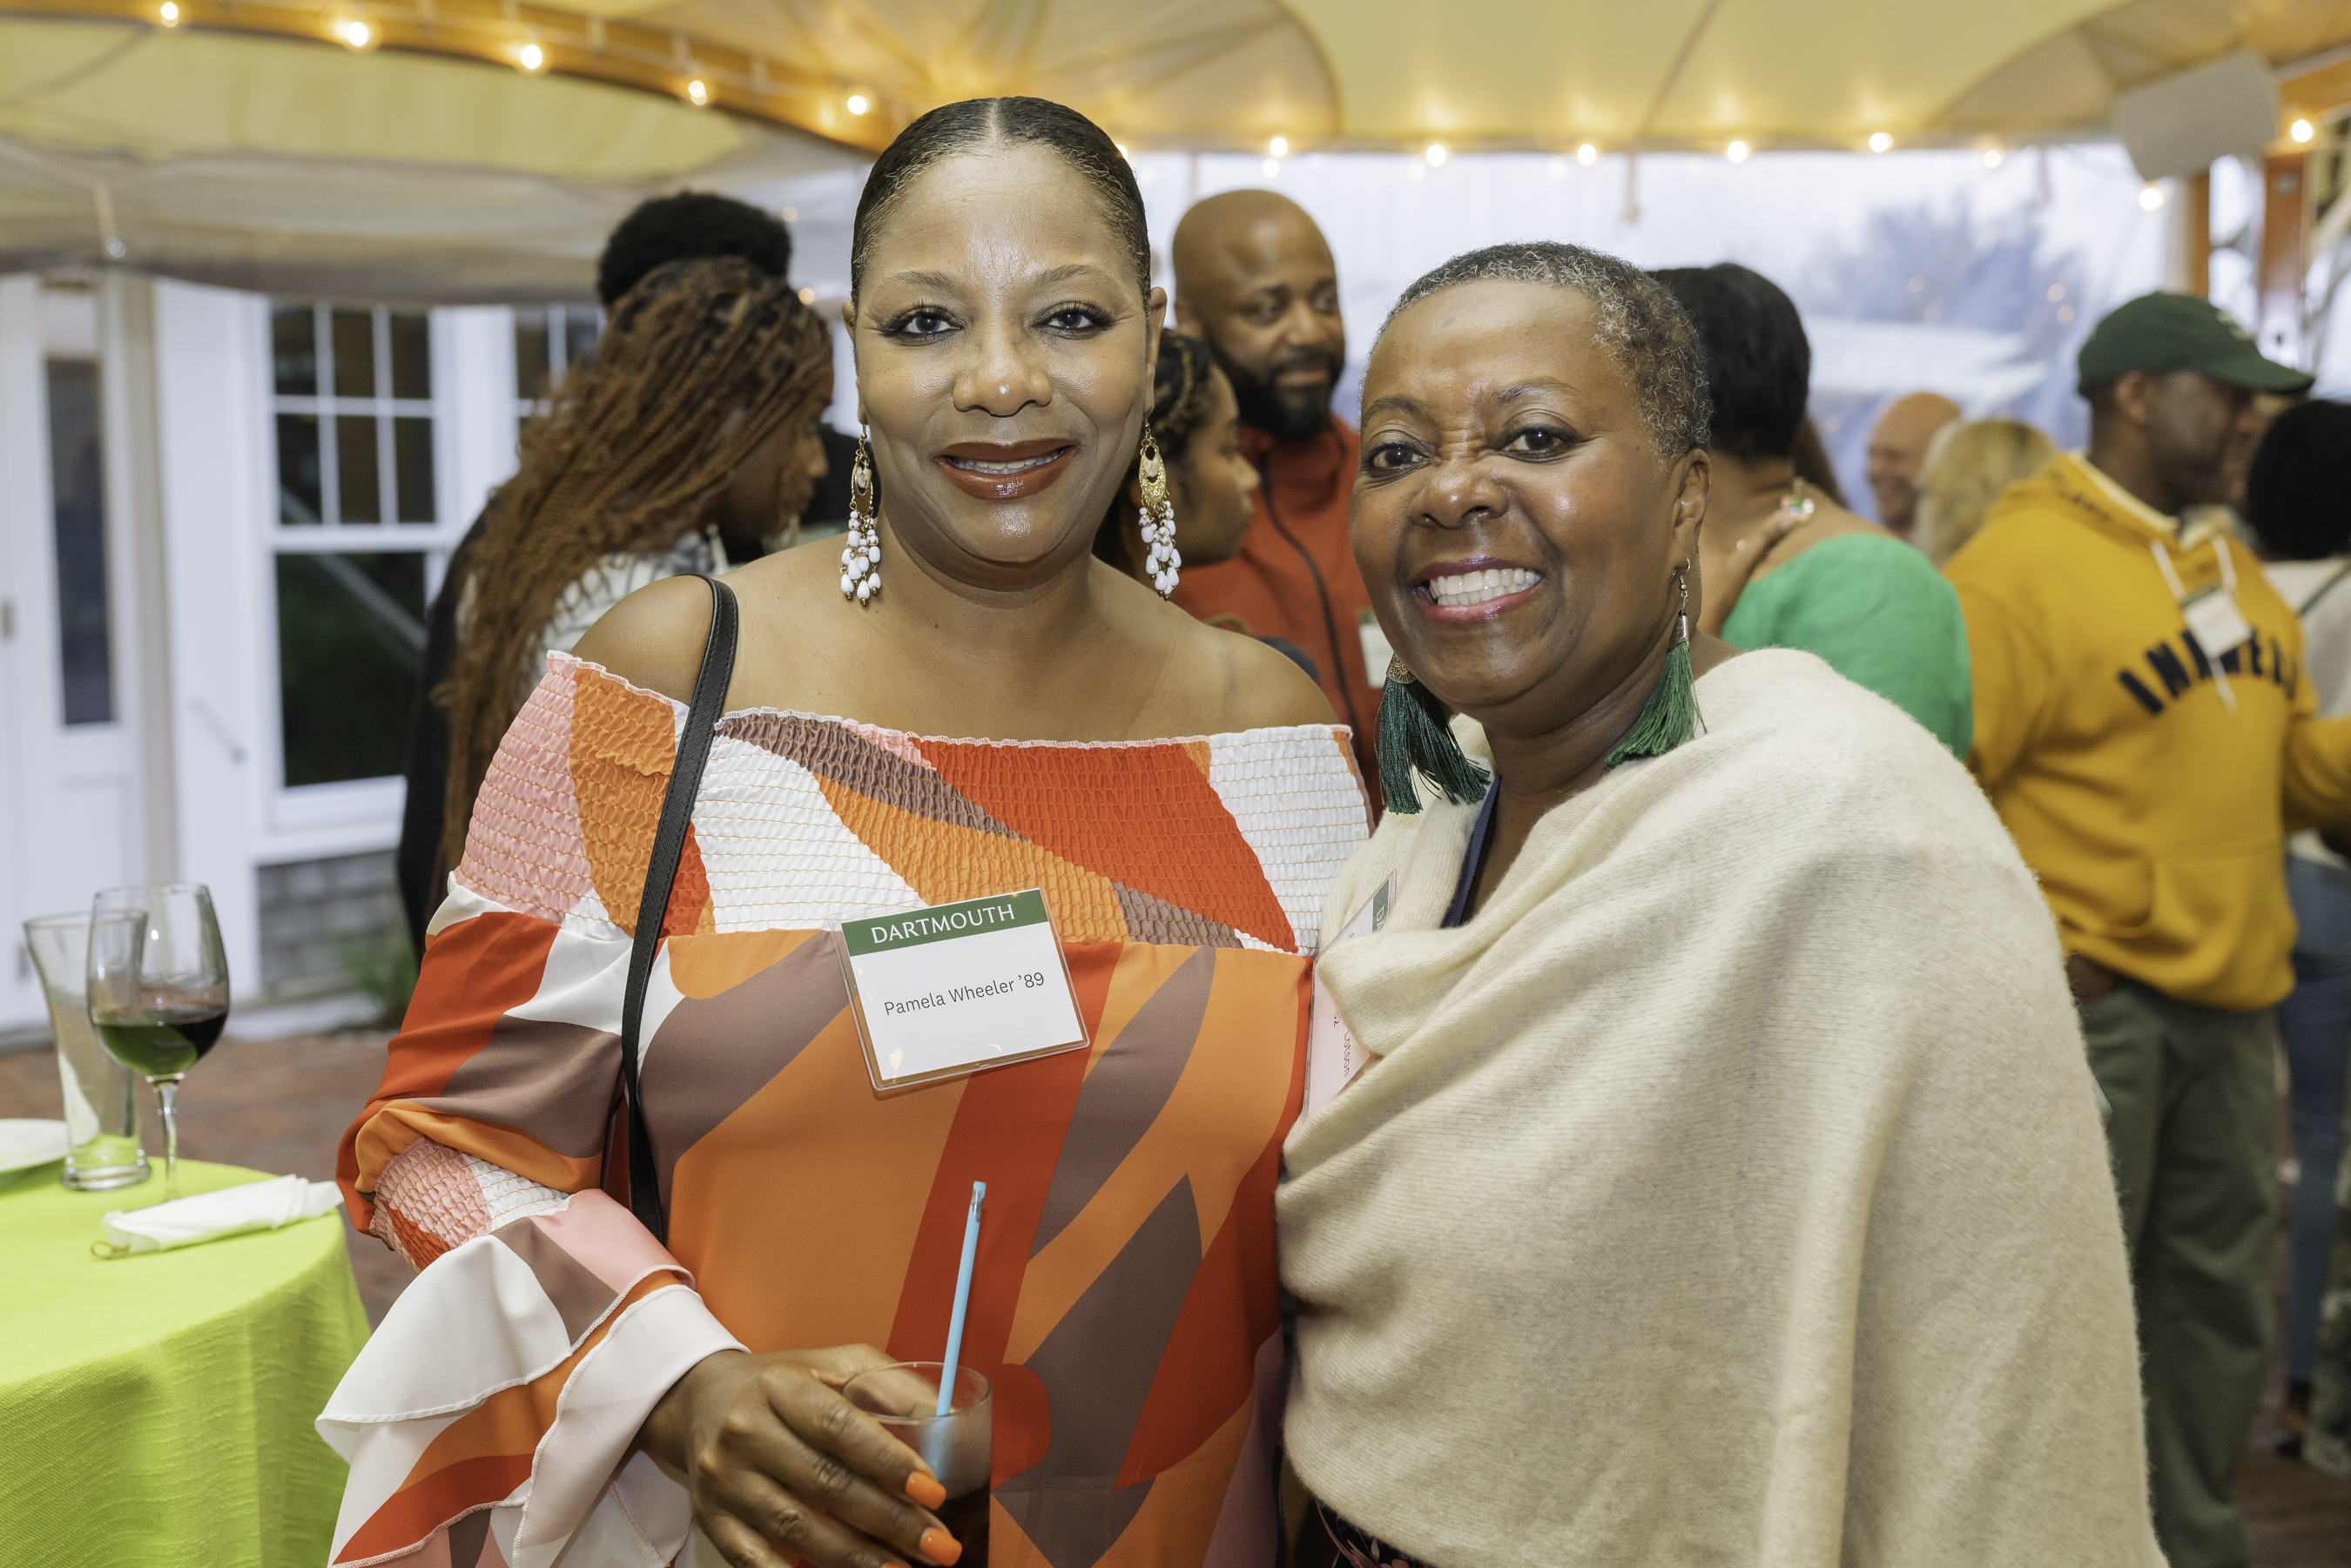 Two women attendees posing and smiling